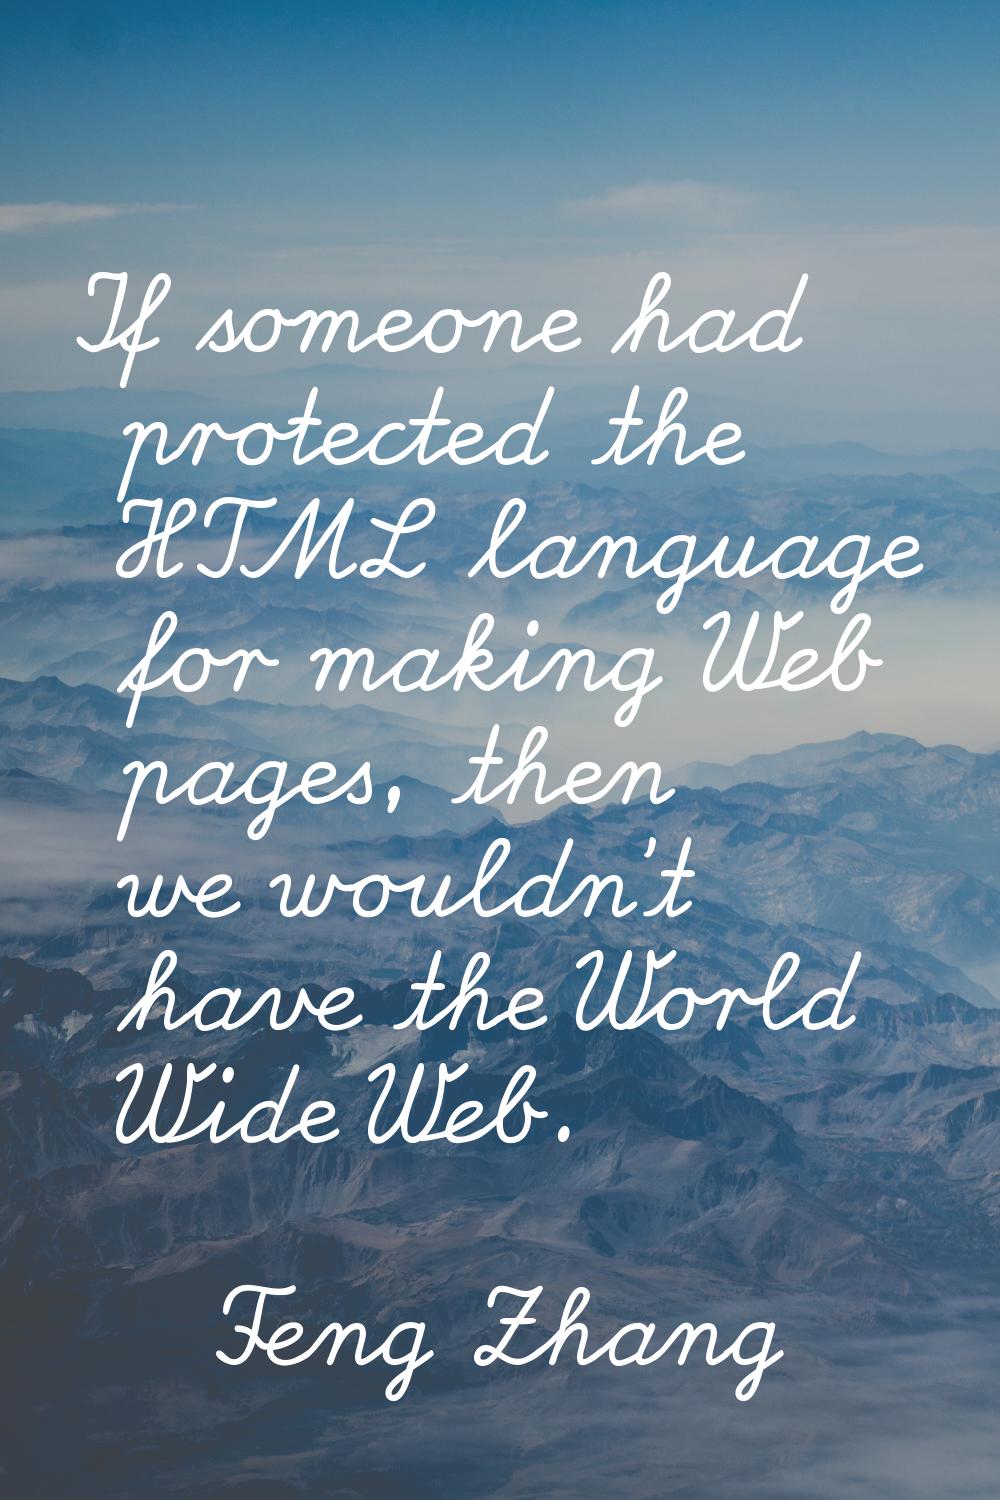 If someone had protected the HTML language for making Web pages, then we wouldn't have the World Wi